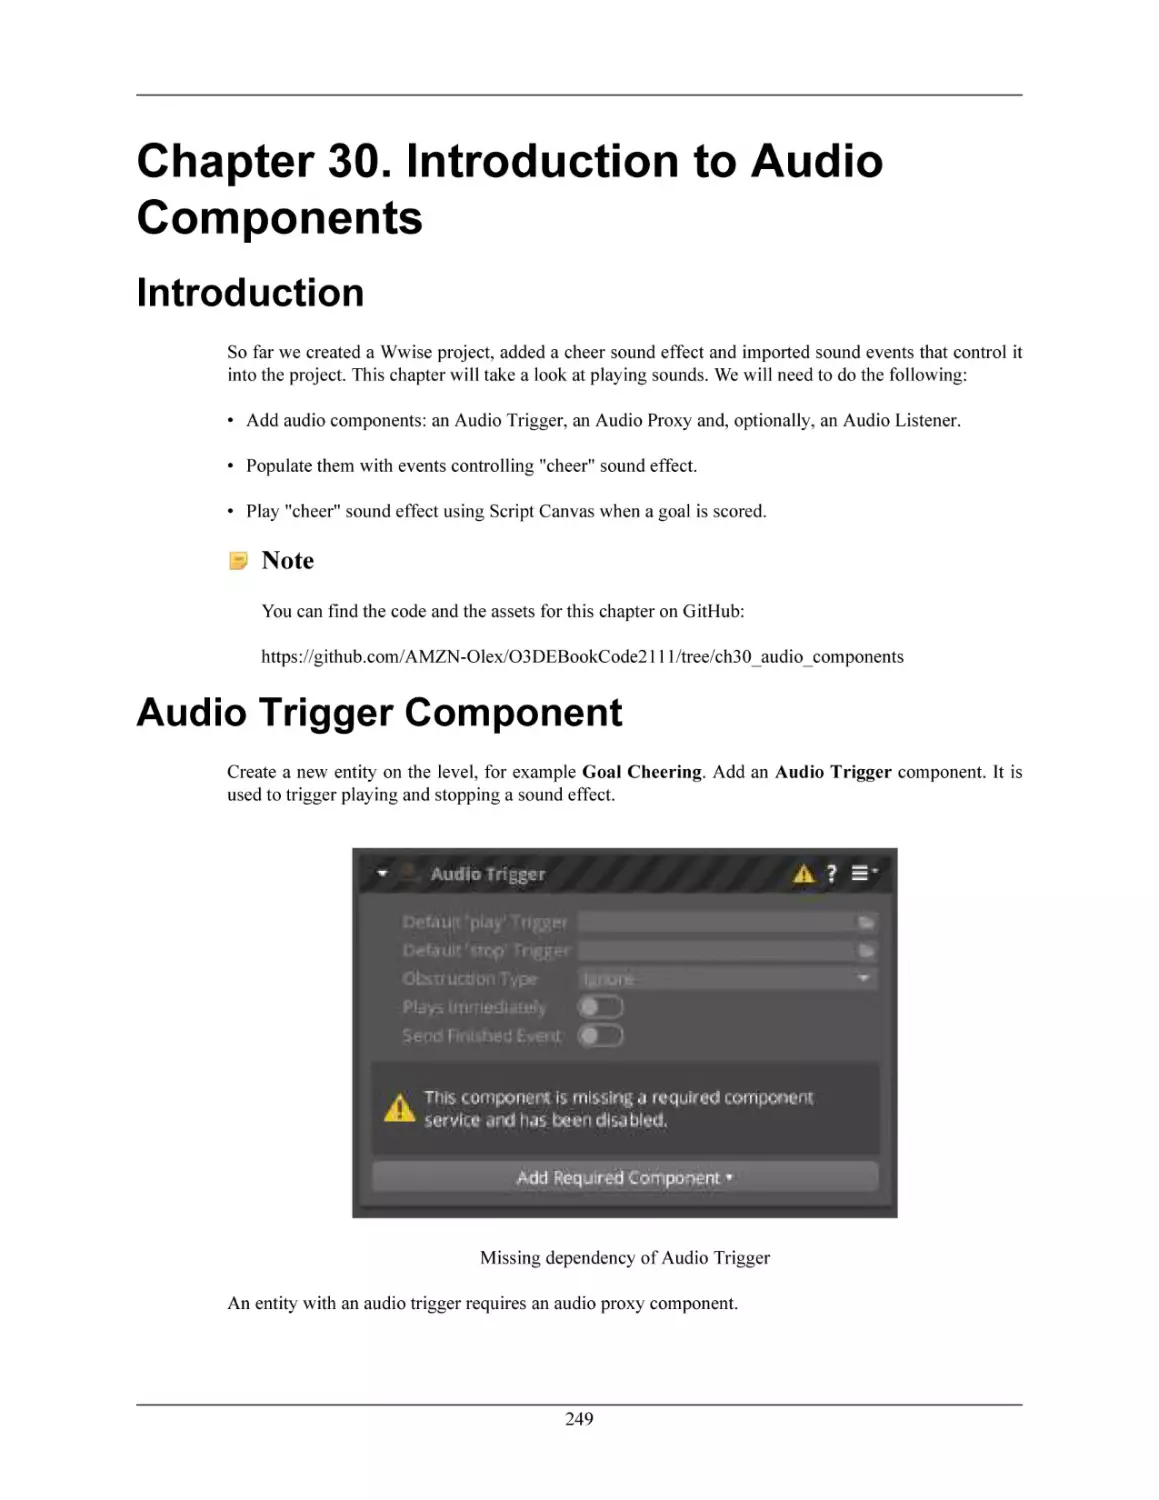 Chapter 30. Introduction to Audio Components
Introduction
Audio Trigger Component